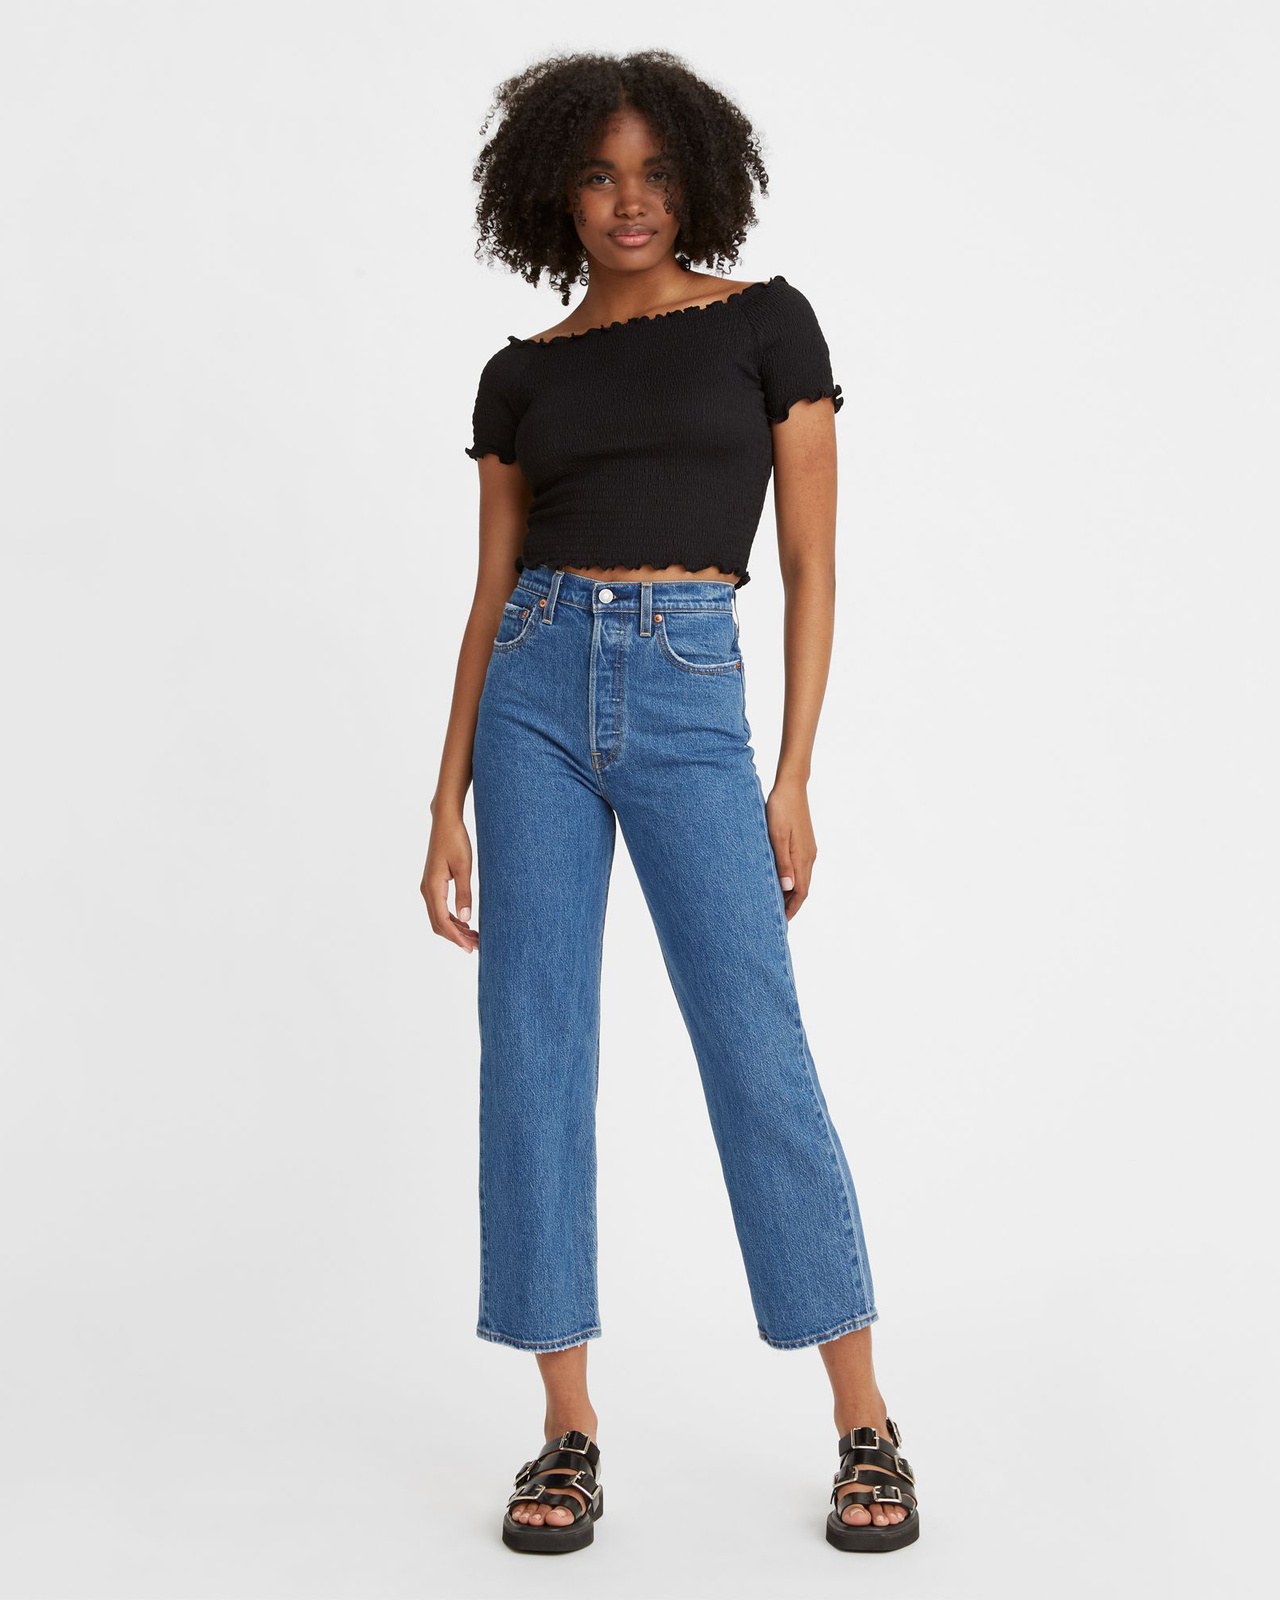 Jeans Ribcage Straight Ankle - Jazz Pop - 24/29